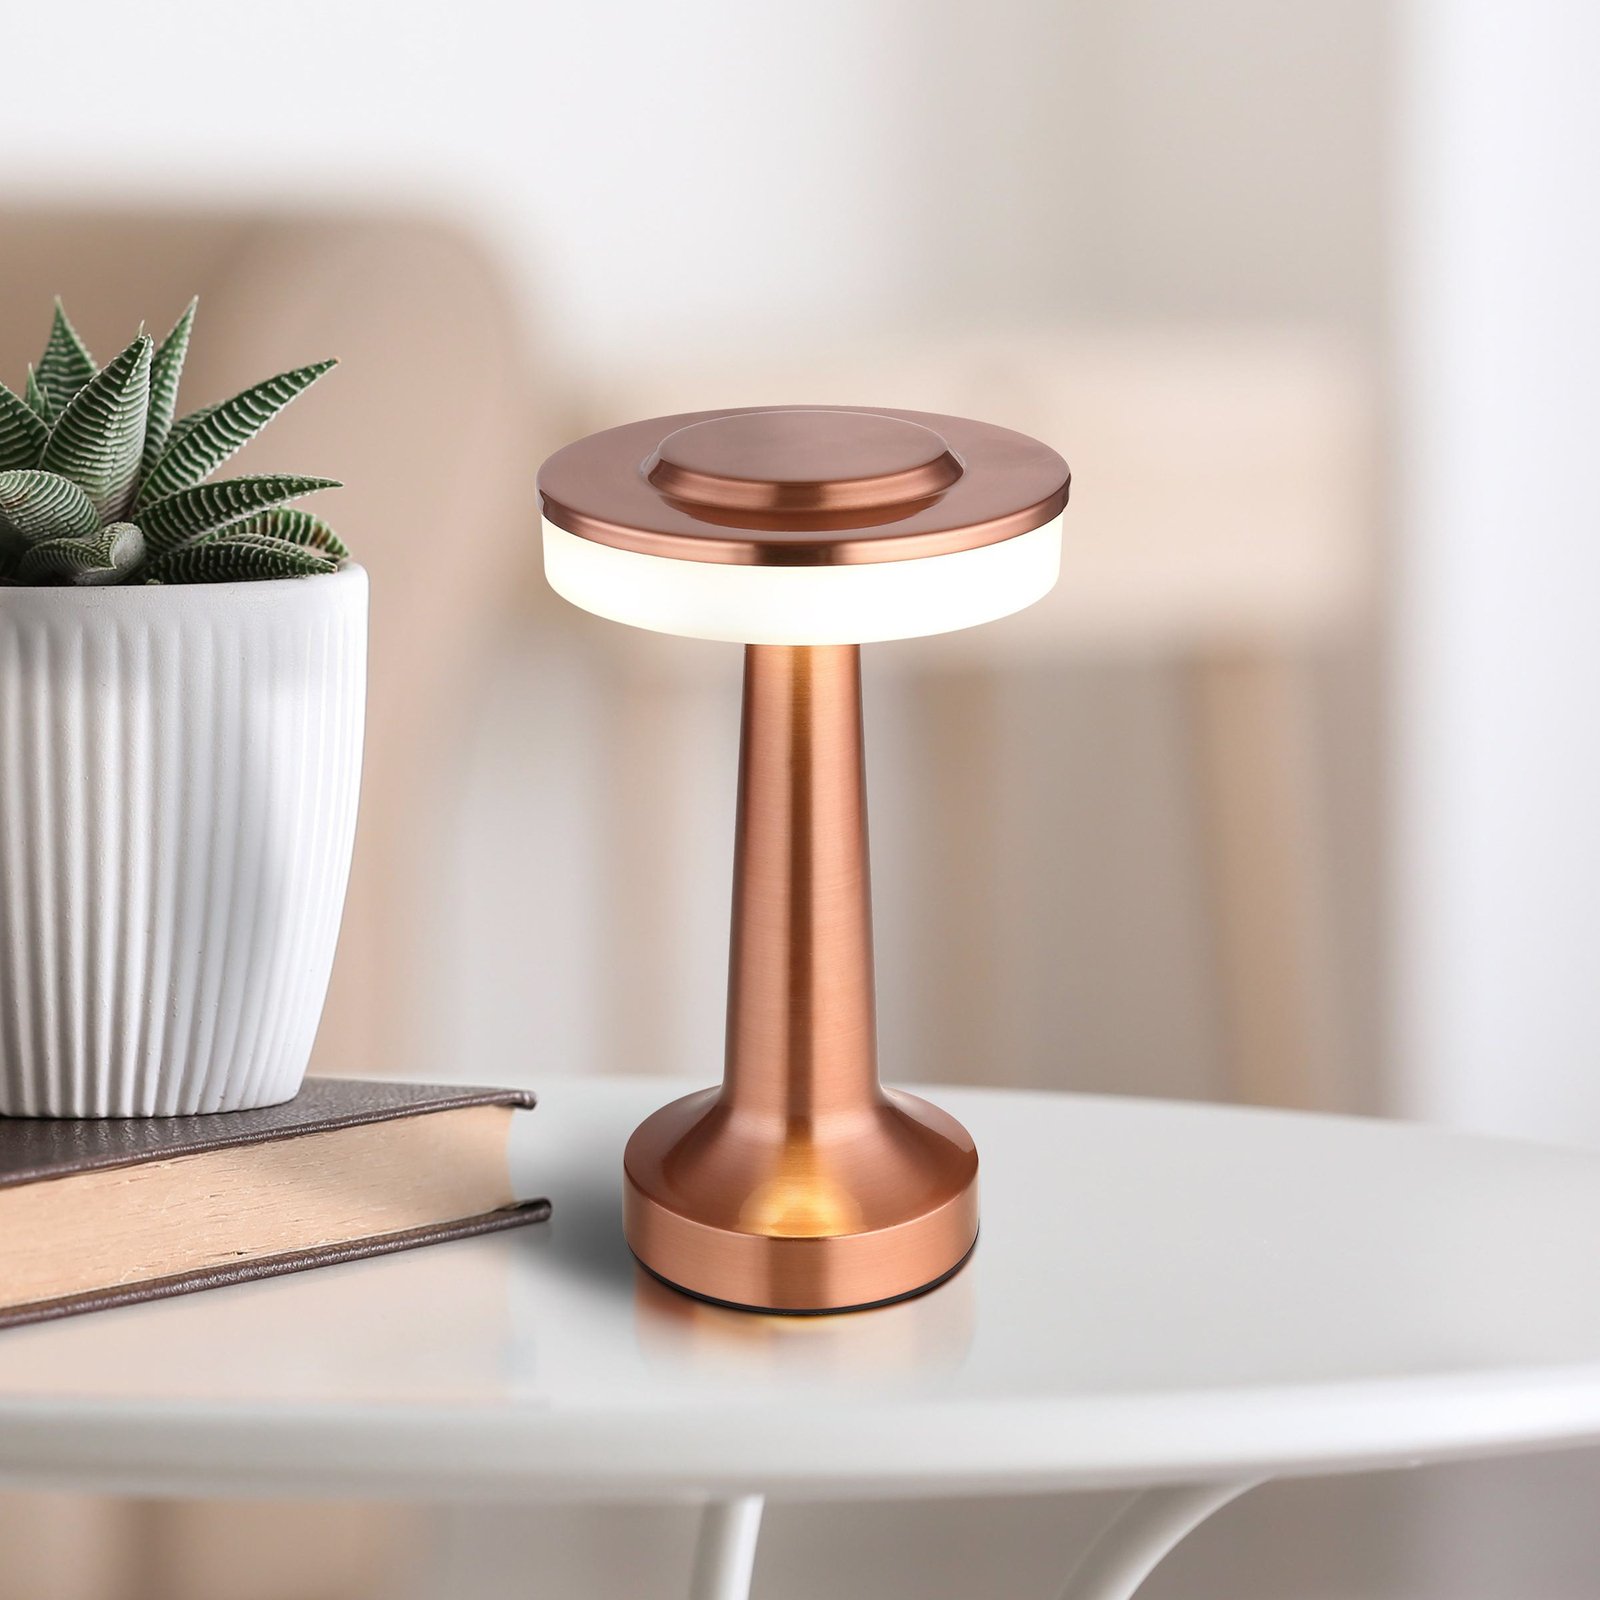 LED table lamp Chloey, copper-coloured, height 20 cm, CCT